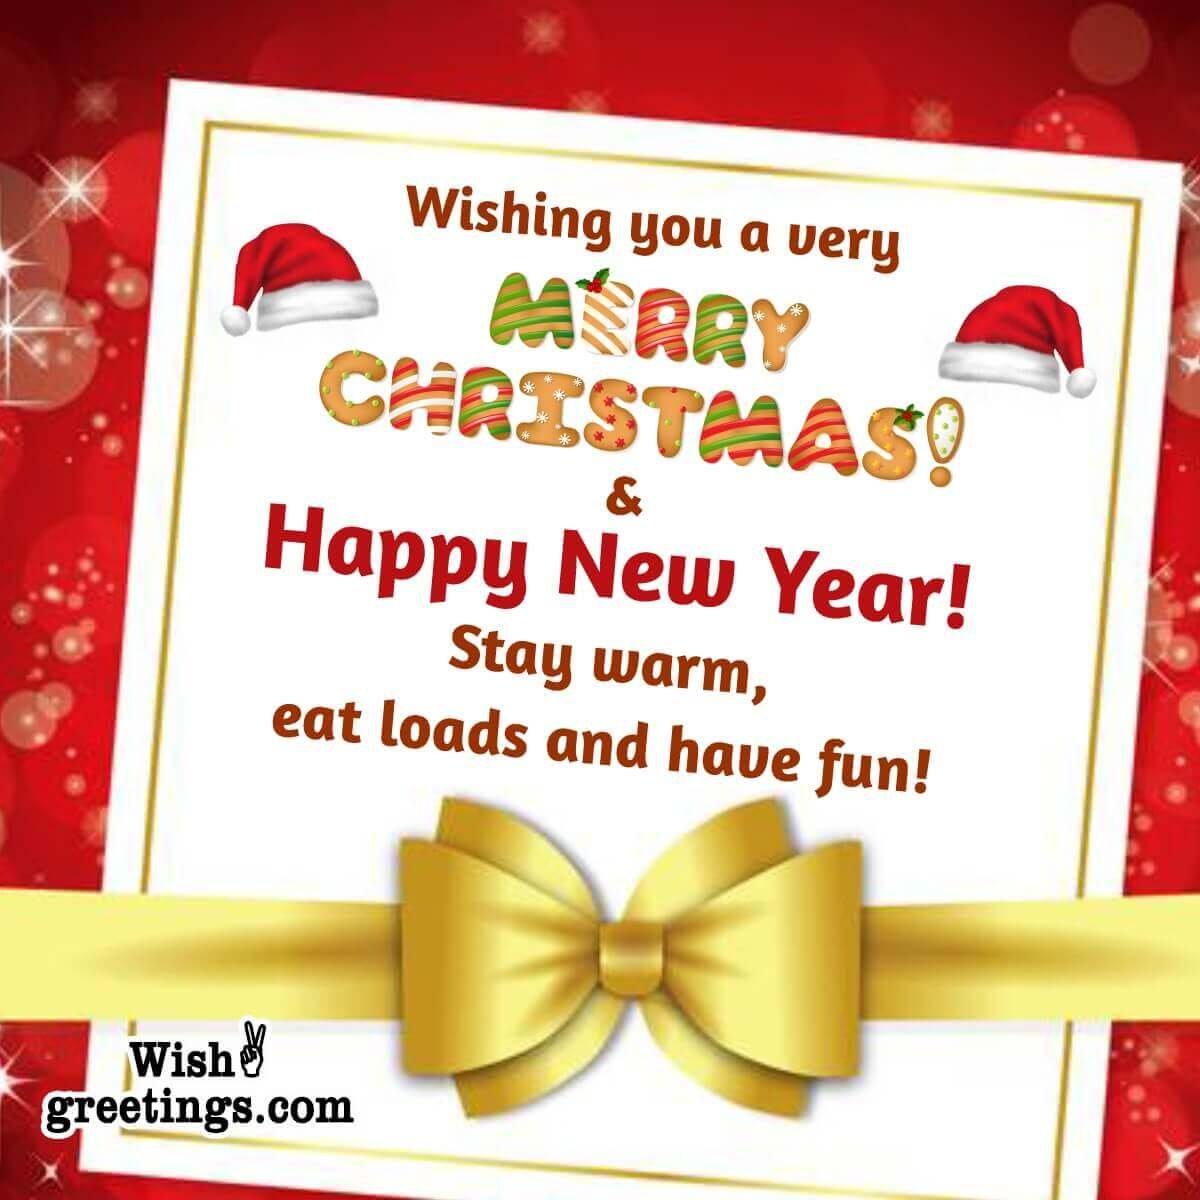 Happy New Year And Merry Christmas Greeting Image